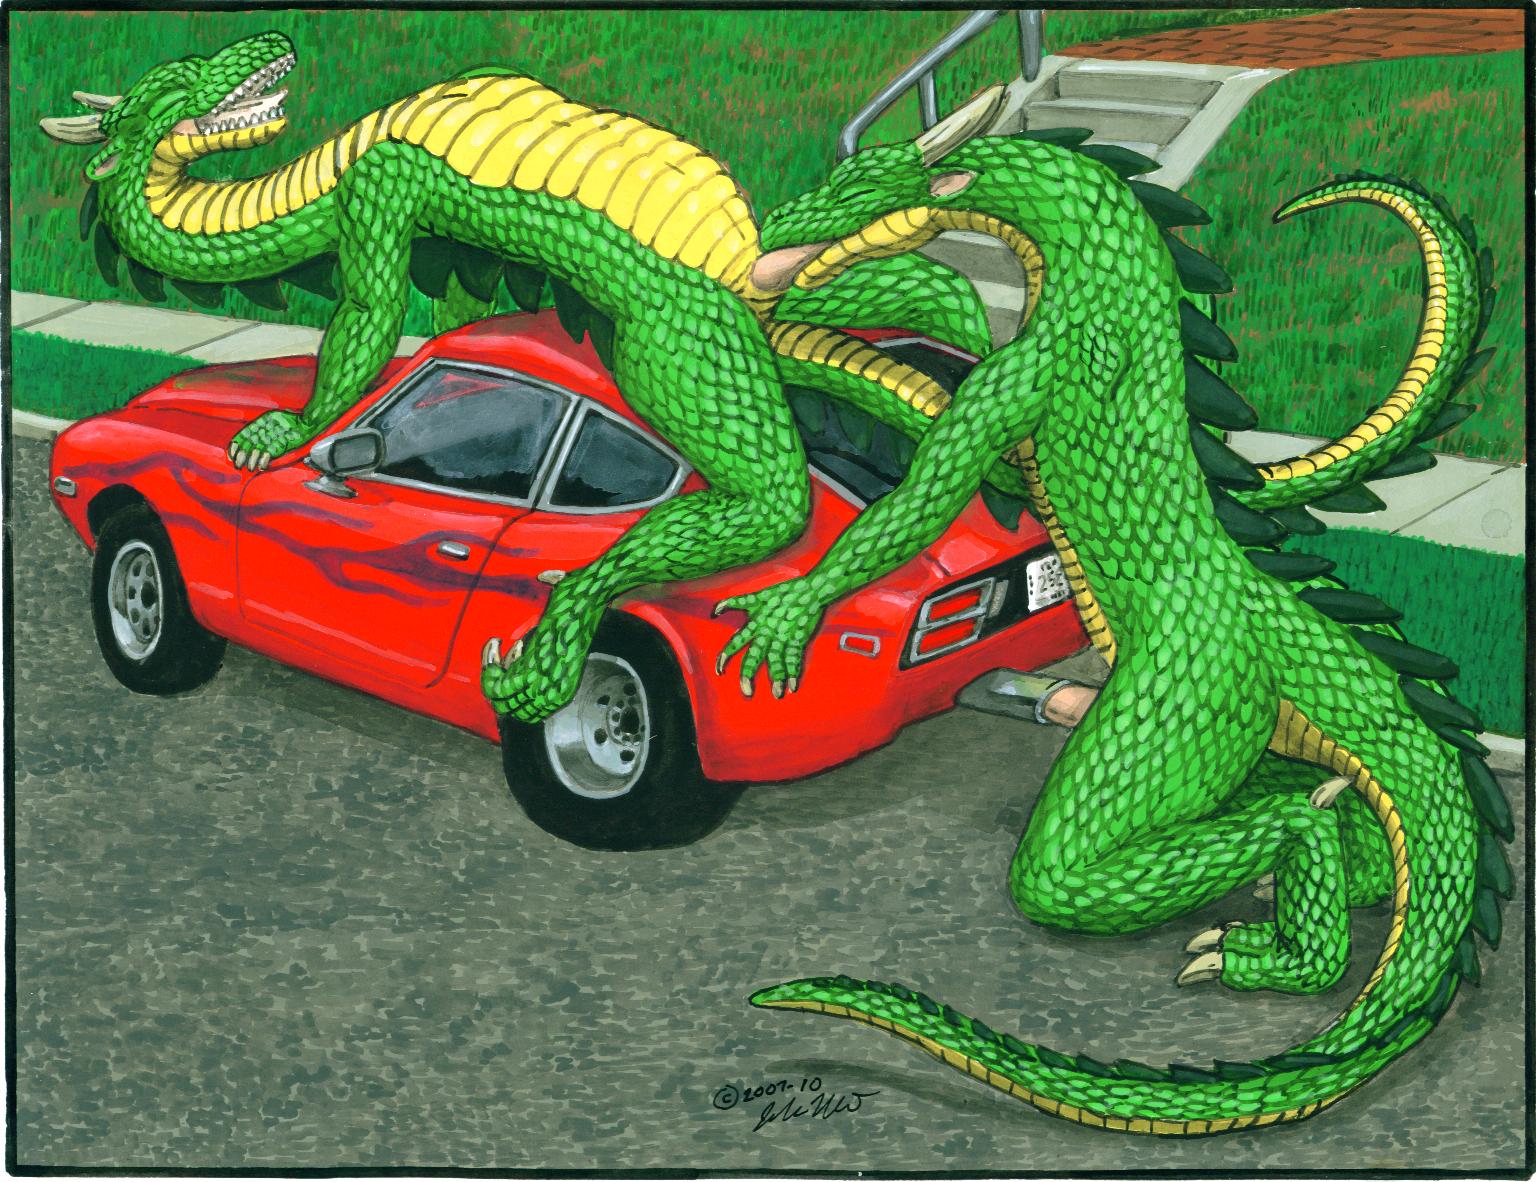 yiffing.in - Gallery: DRAGONS AND CARS.